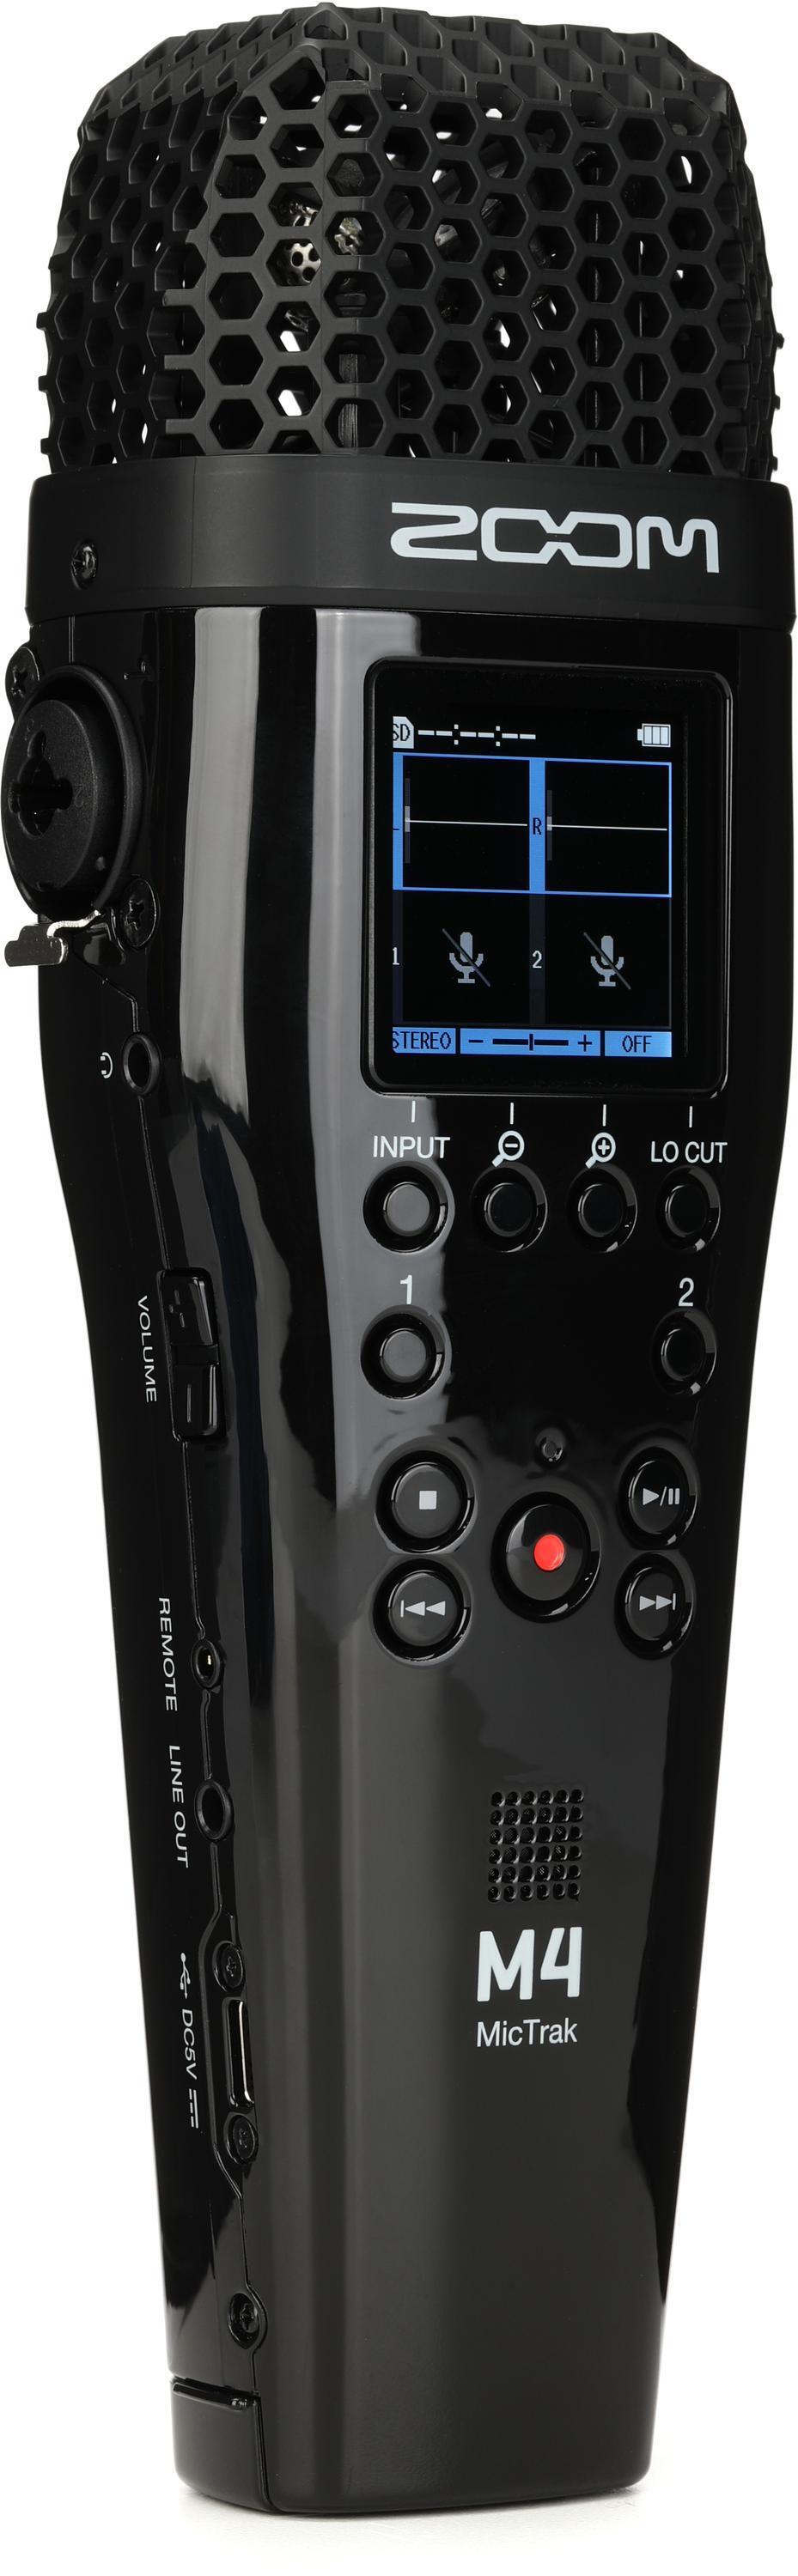 Zoom M4 MicTrak 4-channel 32-bit Recorder with Timecode Generator